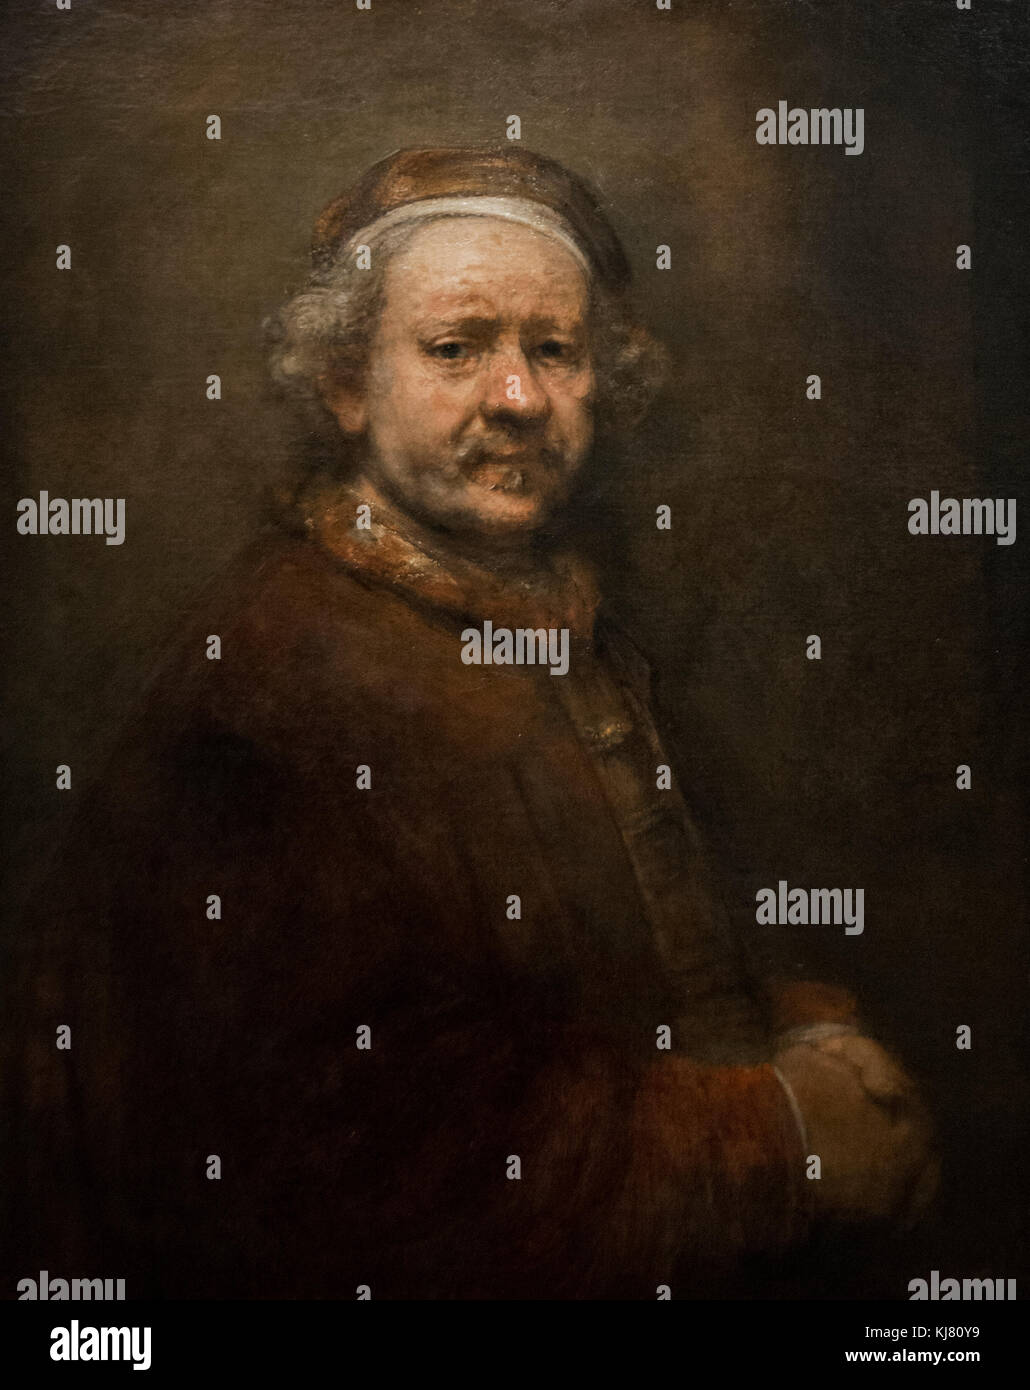 Rembrandt: Self Portrait at the Age of 63 (1669) Stock Photo